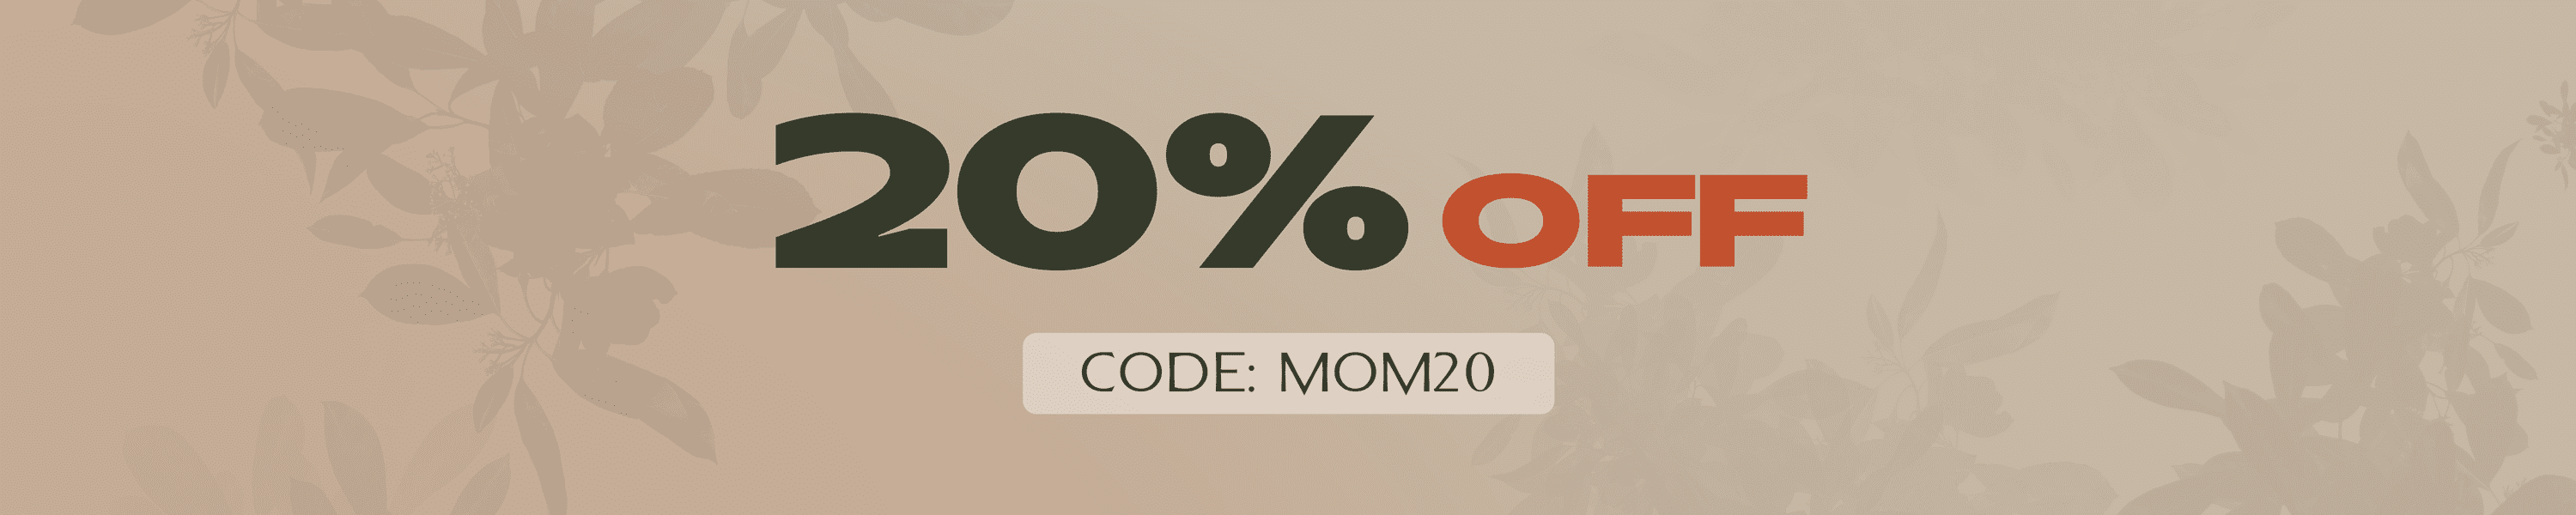 Mother's Day - 20% OFF